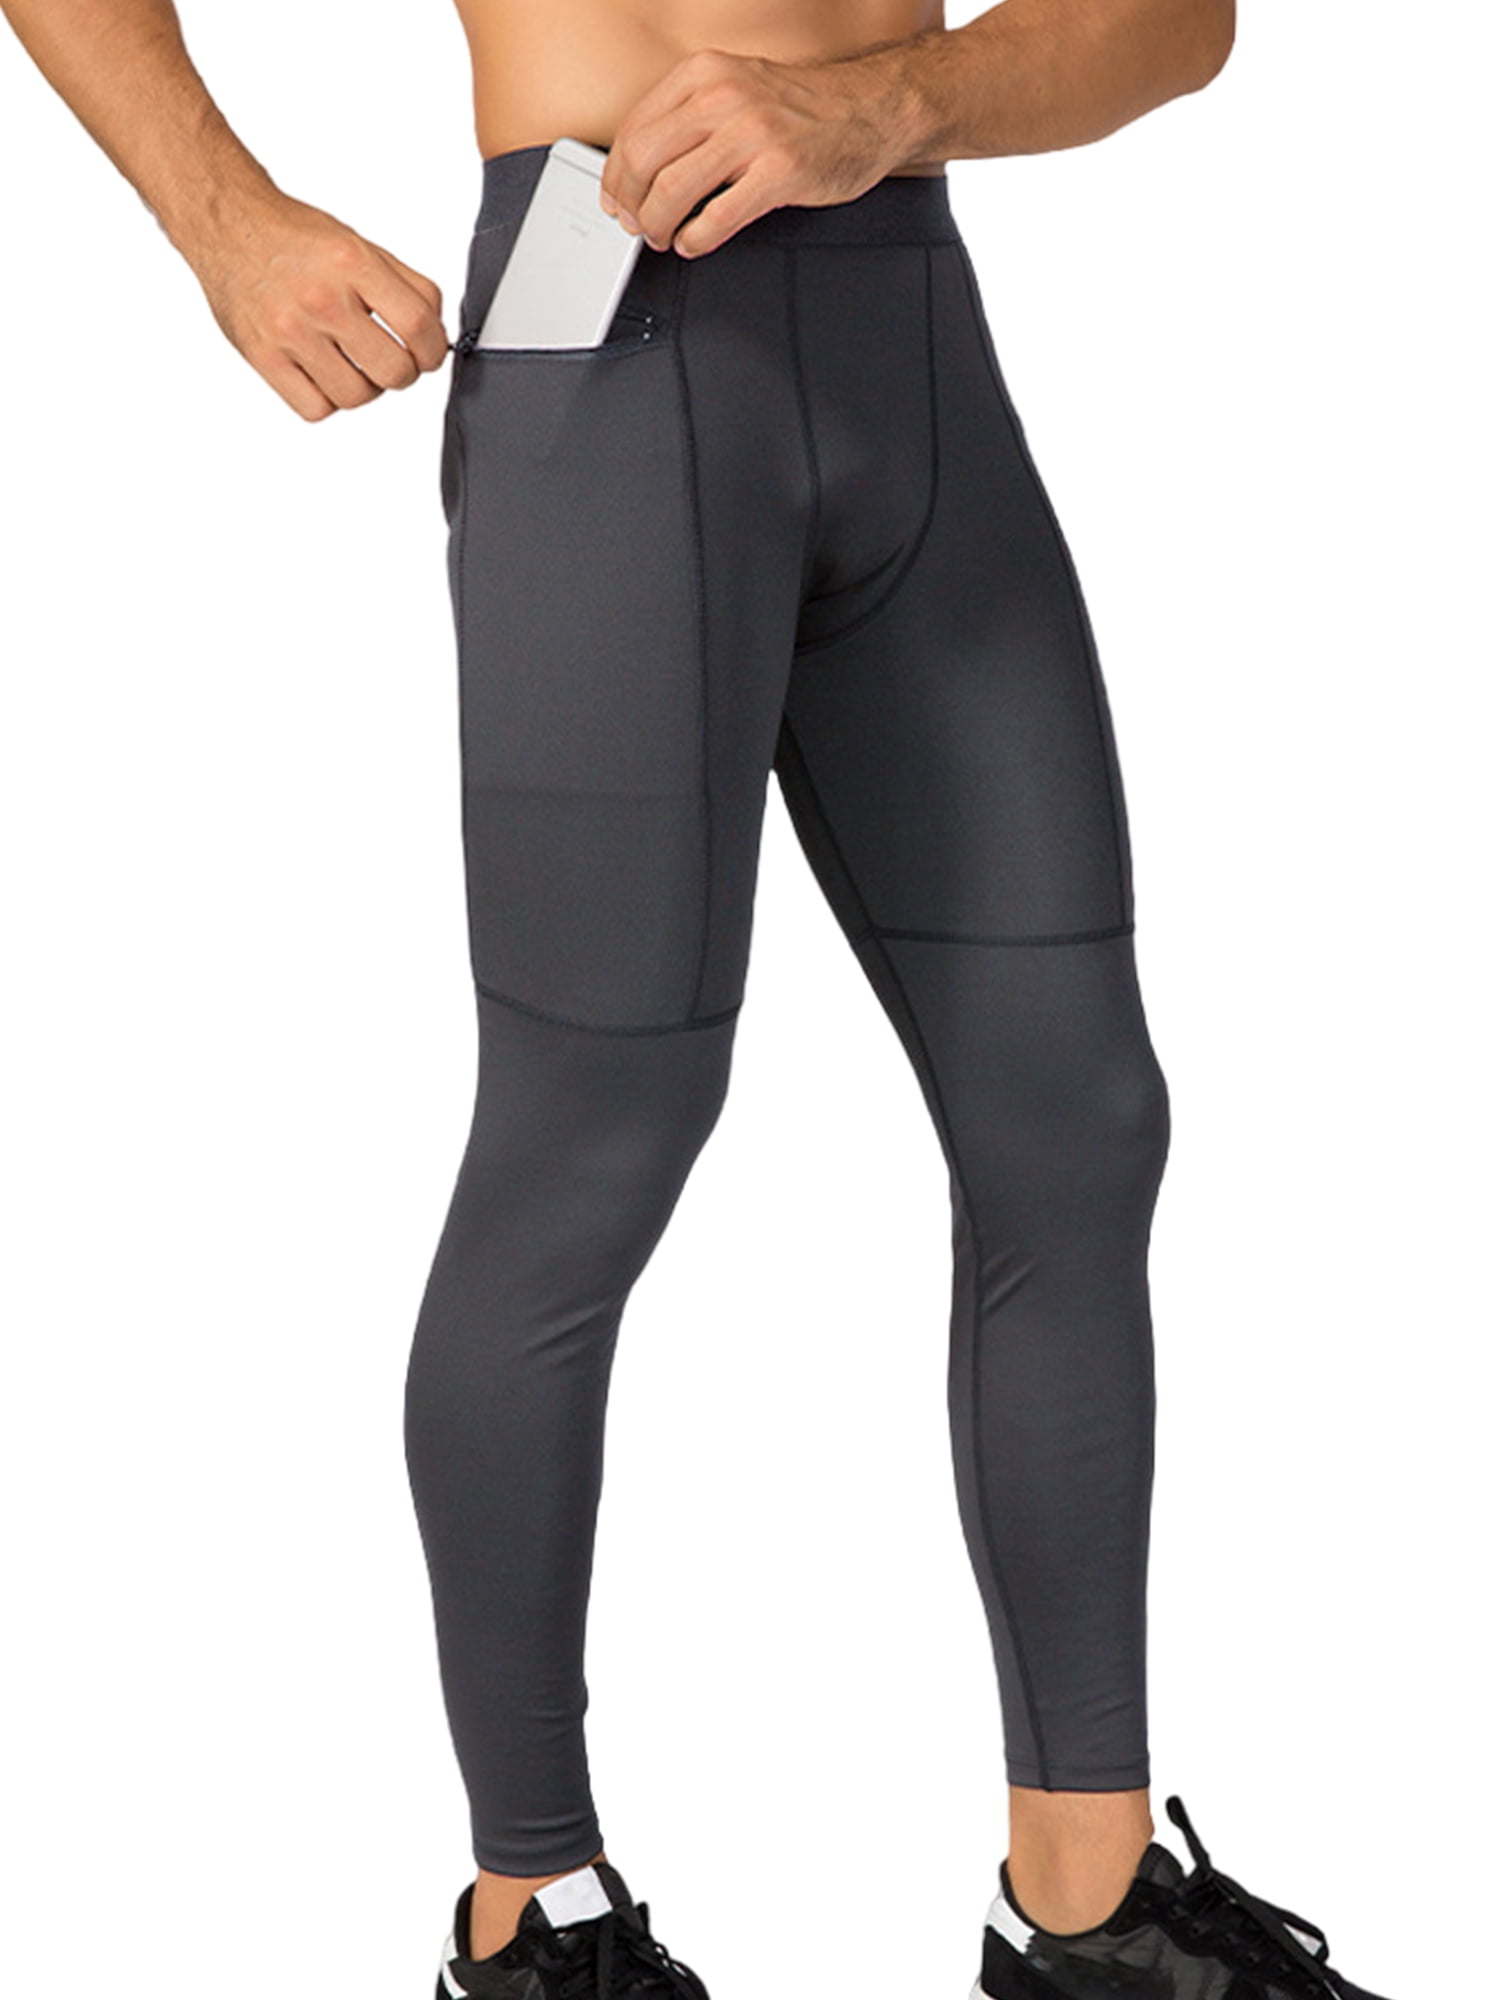 Mens Compression Pants For Sports, Running, Basketball, Gym, Bodybuilding,  Jogging Skinny Leggings Gym Trousers For Men Style 1280E From Iklpz, $19.55